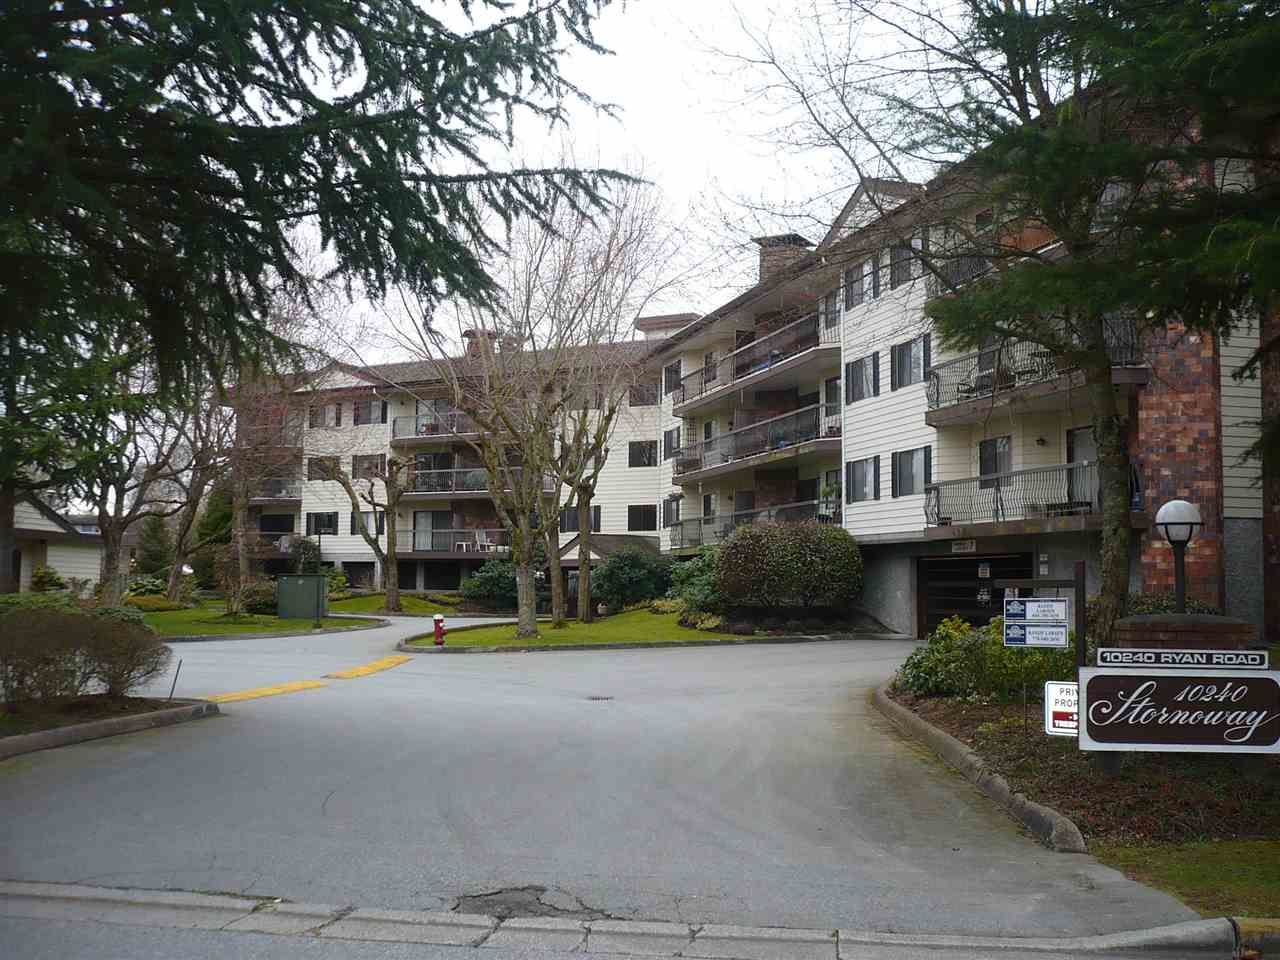 Main Photo: 306 10220 RYAN ROAD in : South Arm Condo for sale : MLS®# R2029435